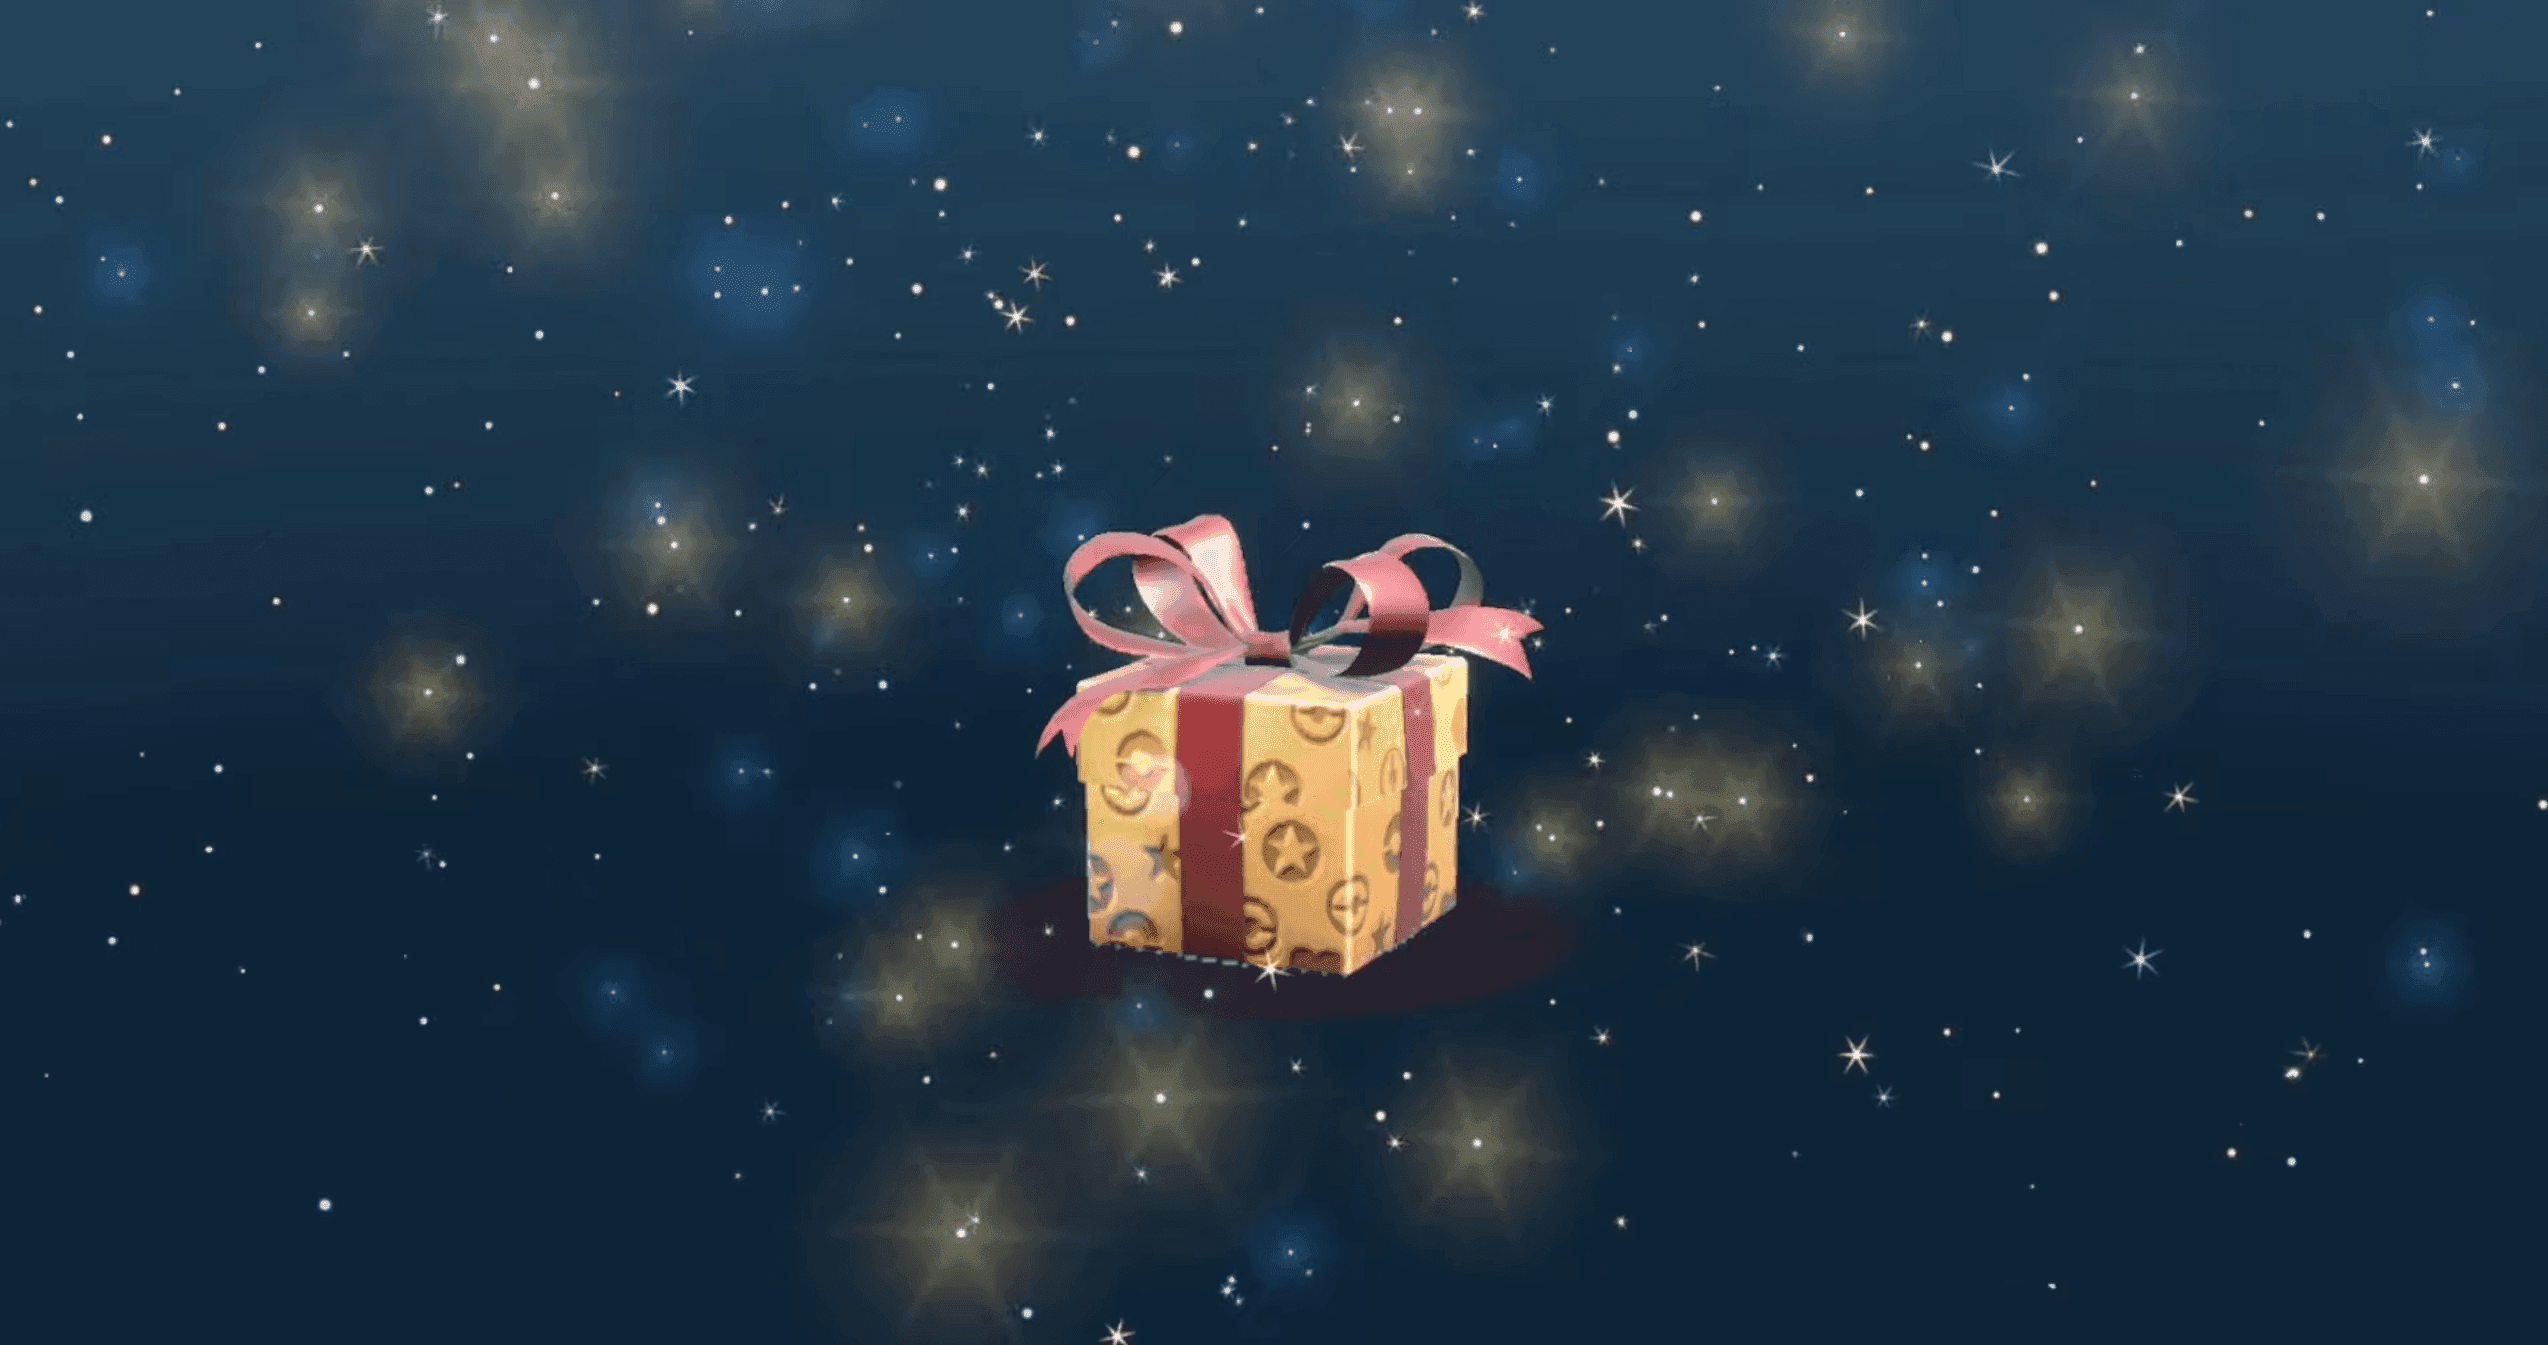 Scarlet and Violet Mystery Gift Scene - A gift-wrapped box in the middle of a dark background